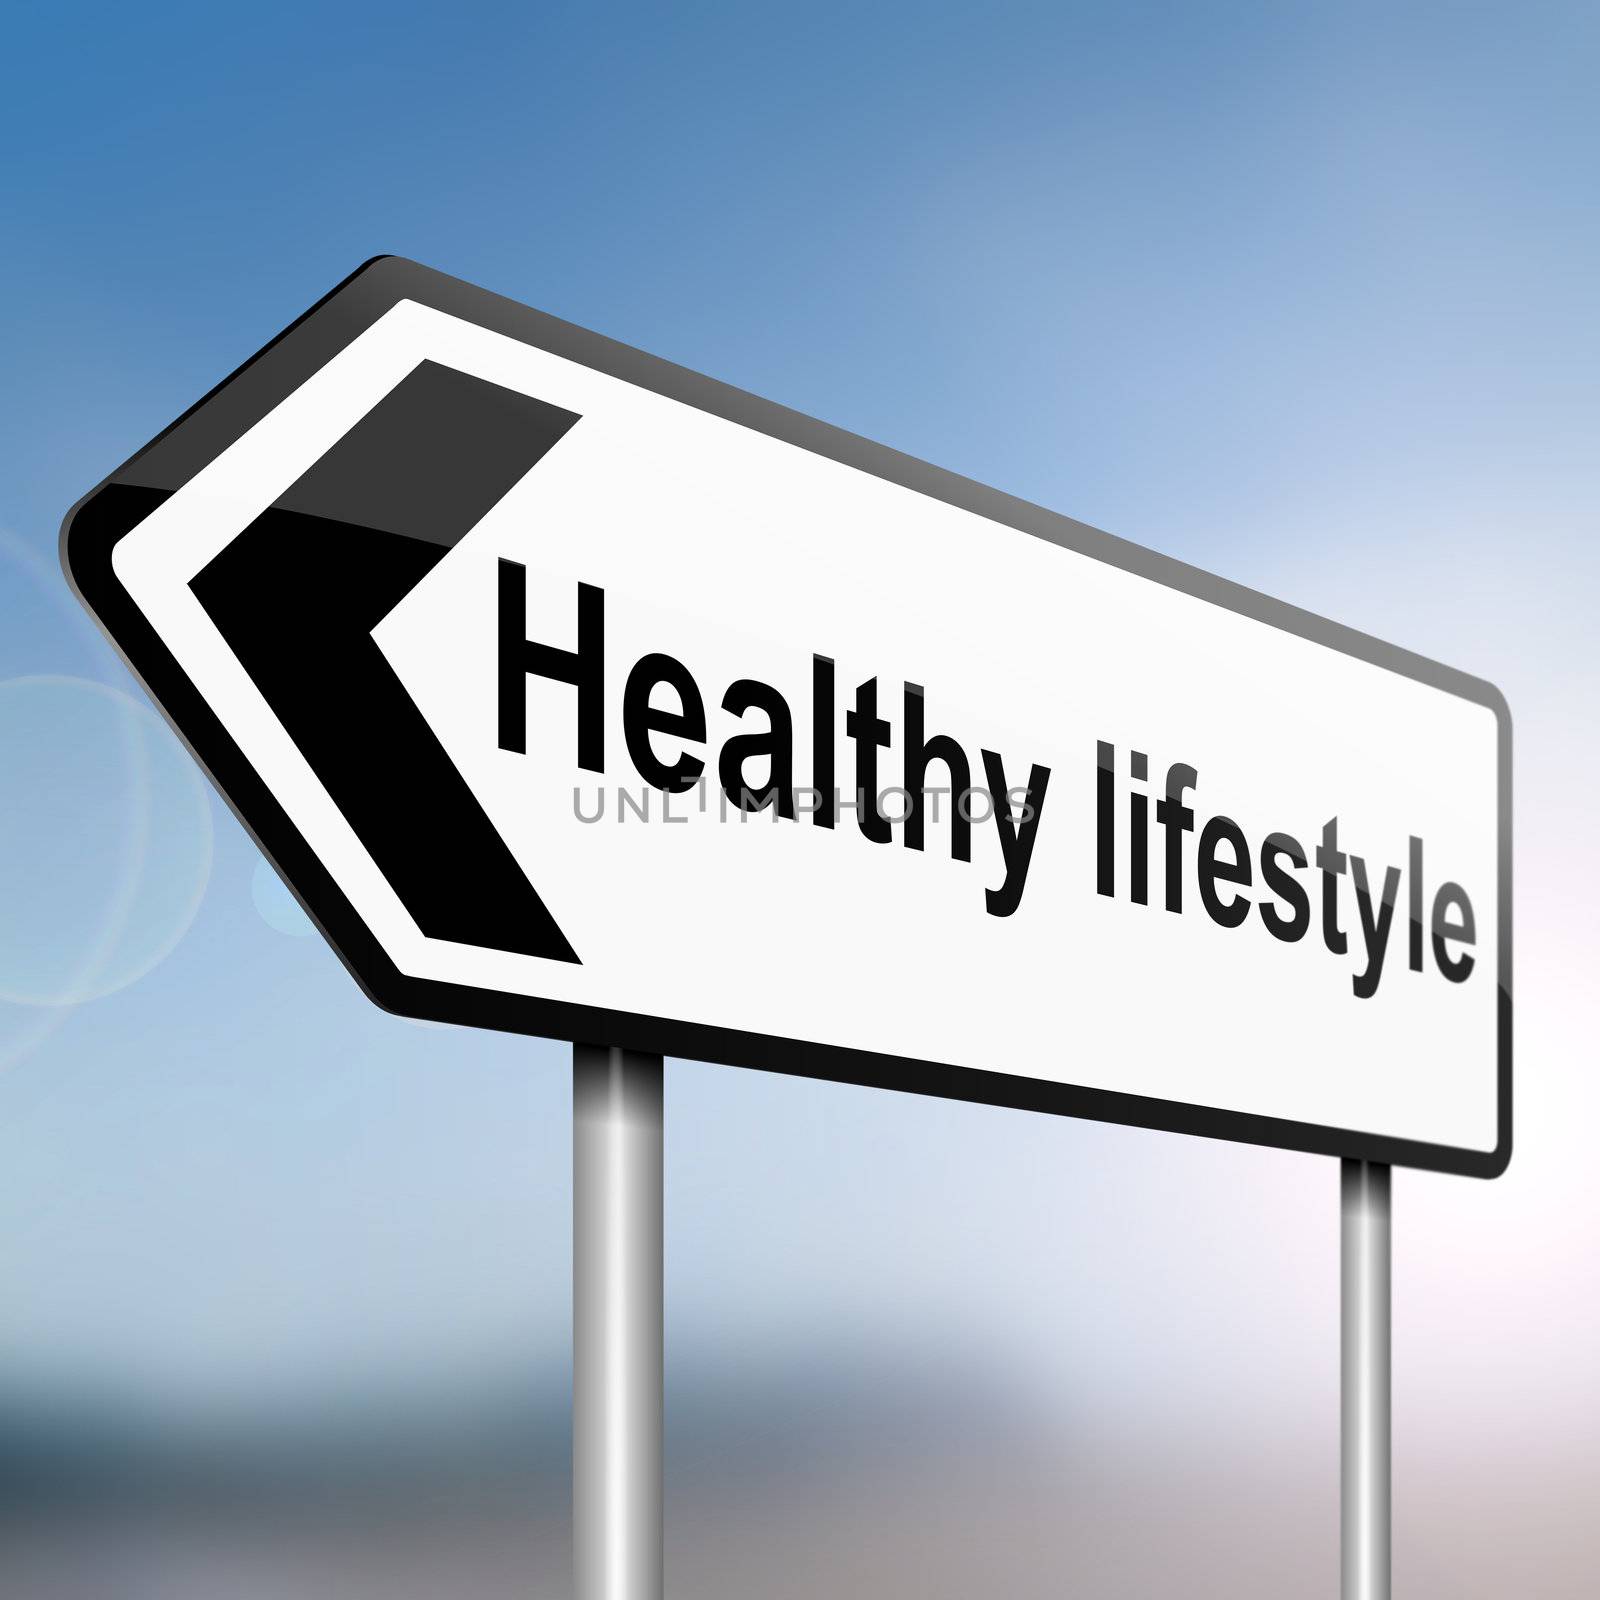 Healthy lifestyle. by 72soul